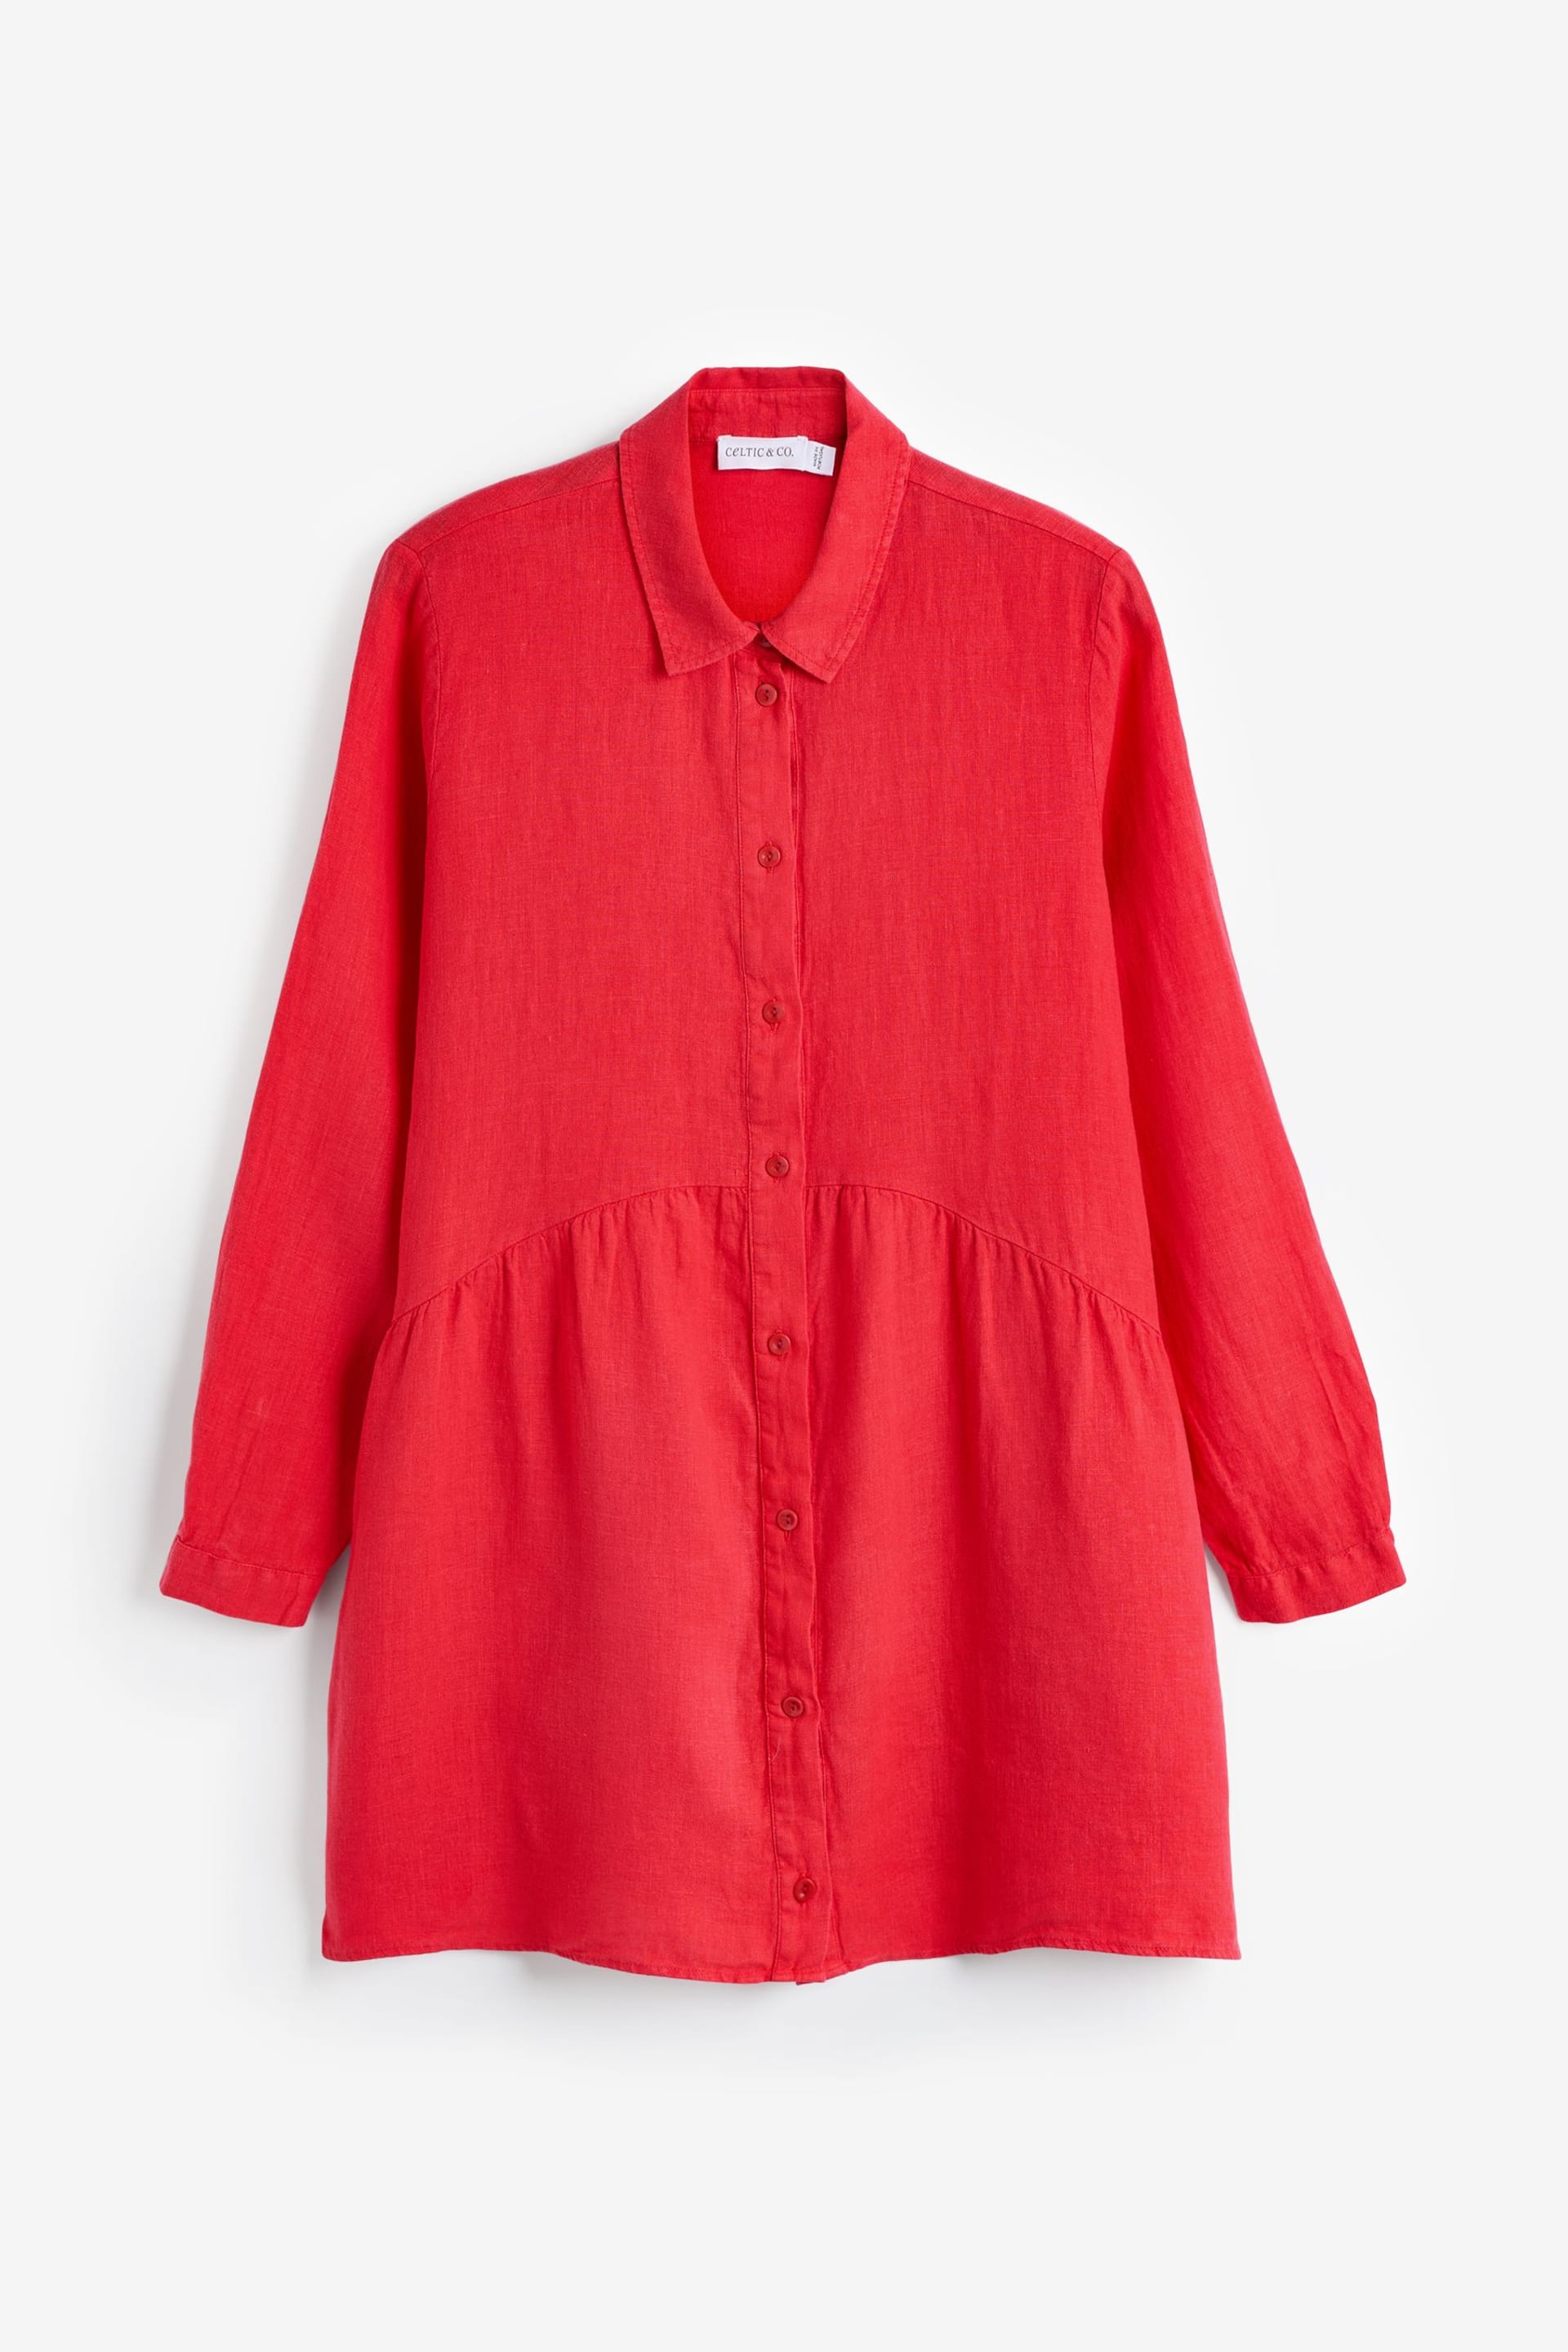 Celtic & Co. Red Linen Gathered Waist Tunic - Image 2 of 2